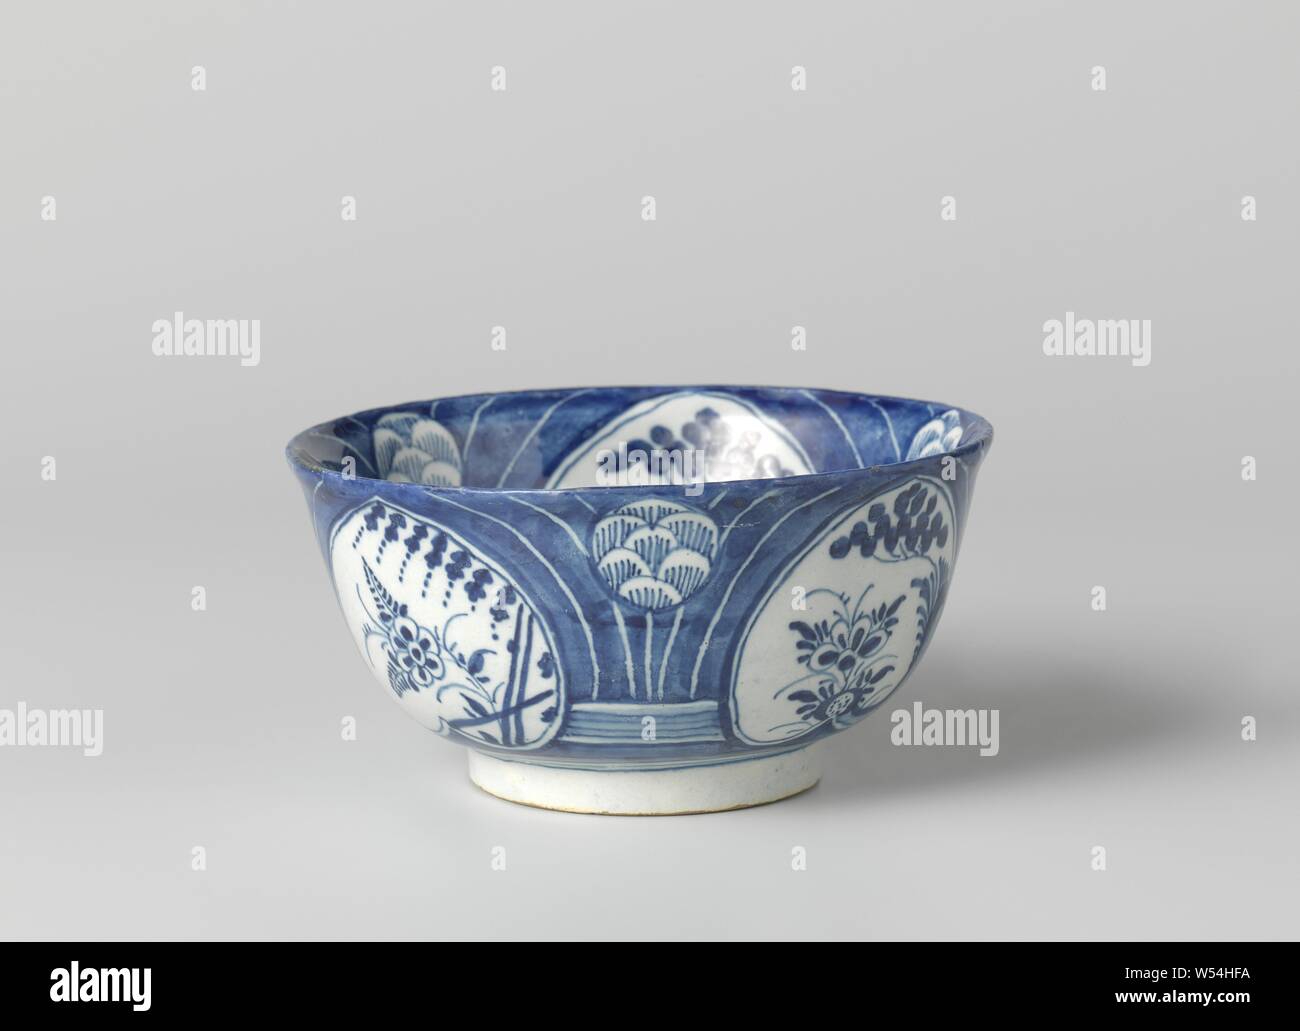 Bowl of faience, blue decorated. On the inside and outside, respectively, decorated with three and four so-called heart motifs that are filled with flowers and leaves., De Dubbele Schenkkan, Delft, c. 1688 - c. 1715, d 11.5 cm × h 5.5 cm Stock Photo